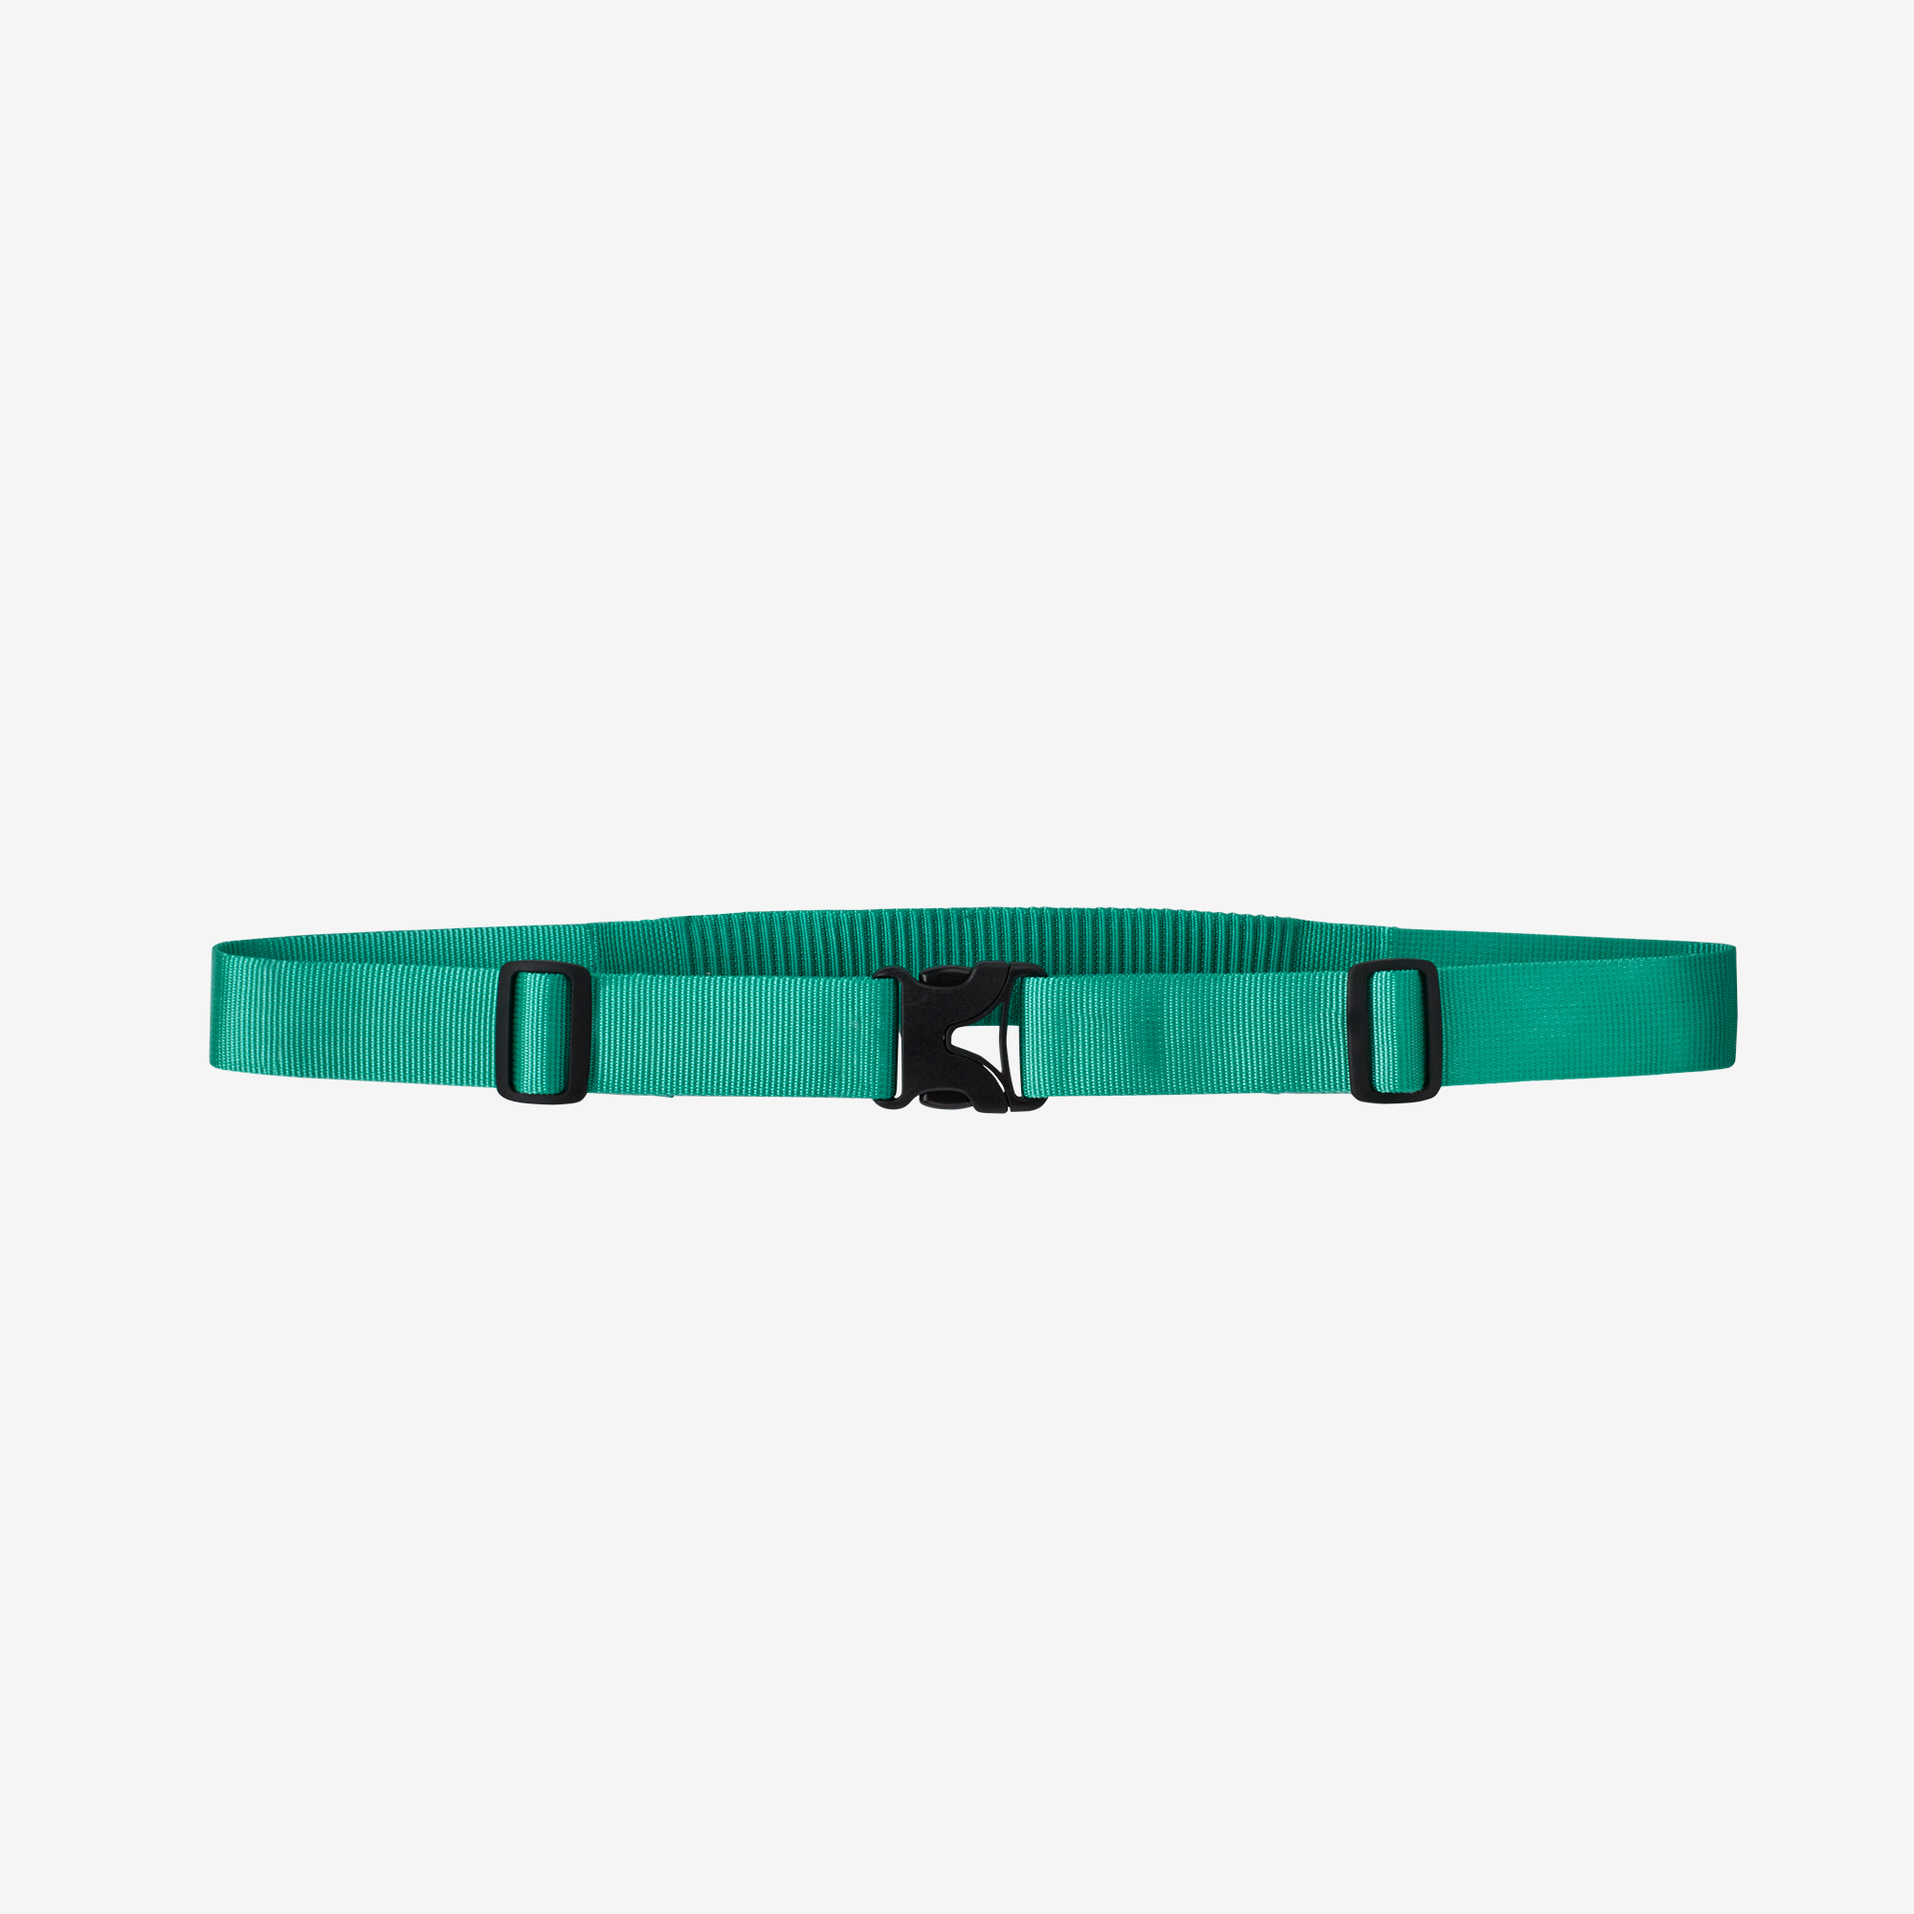 Patagonia Secure Stretch Wading Belt - Fresh Teal - Small